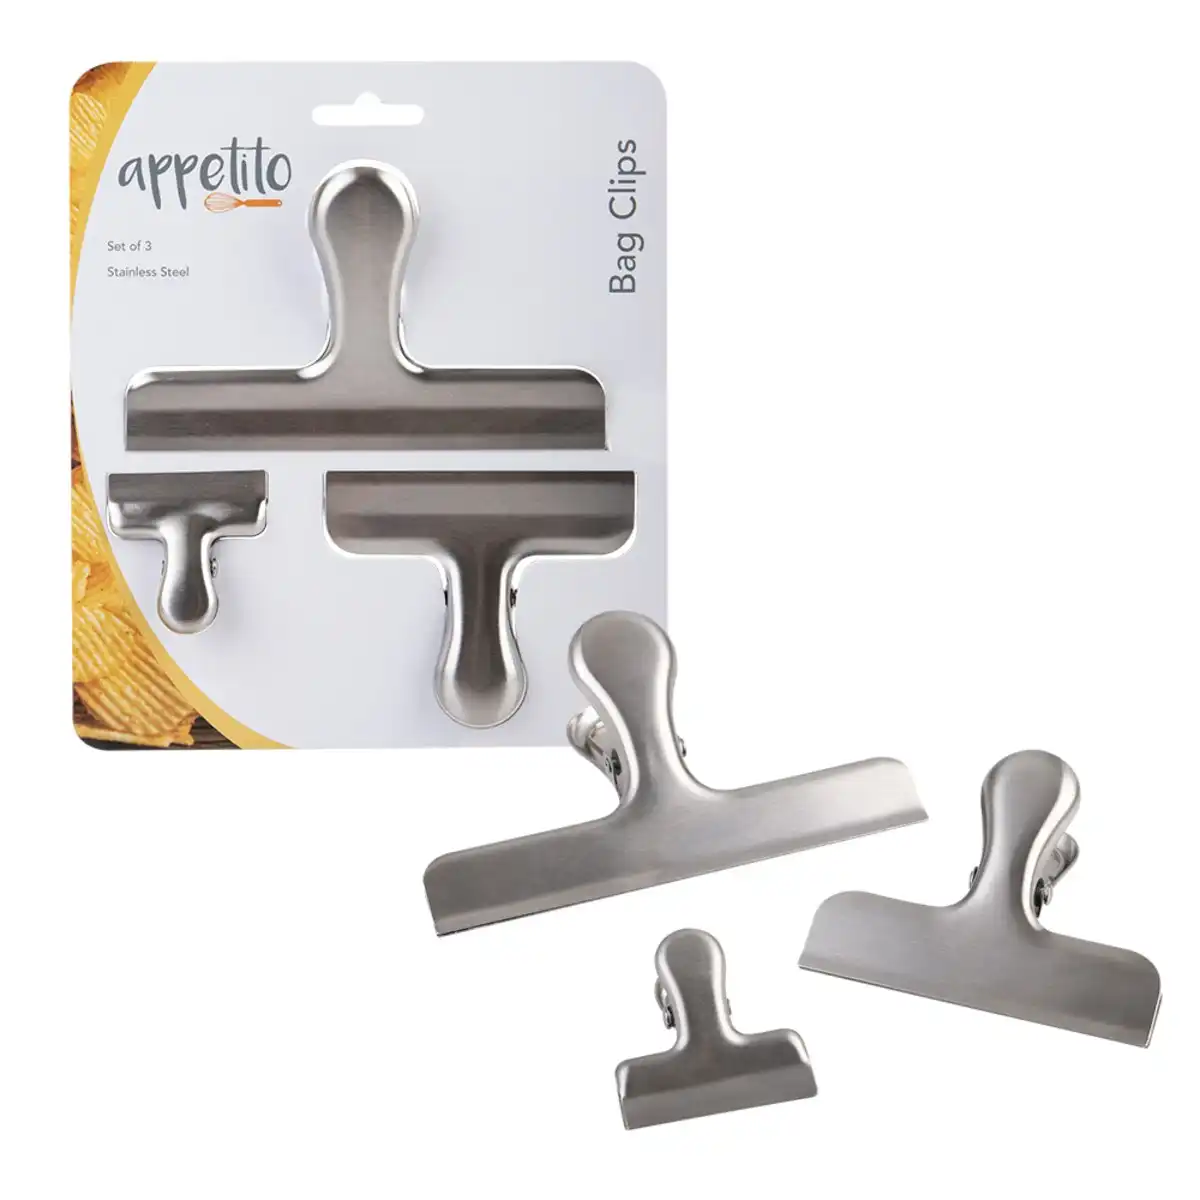 Appetito Stainless Steel Bag Clips Set 3 (Asst. Sizes)